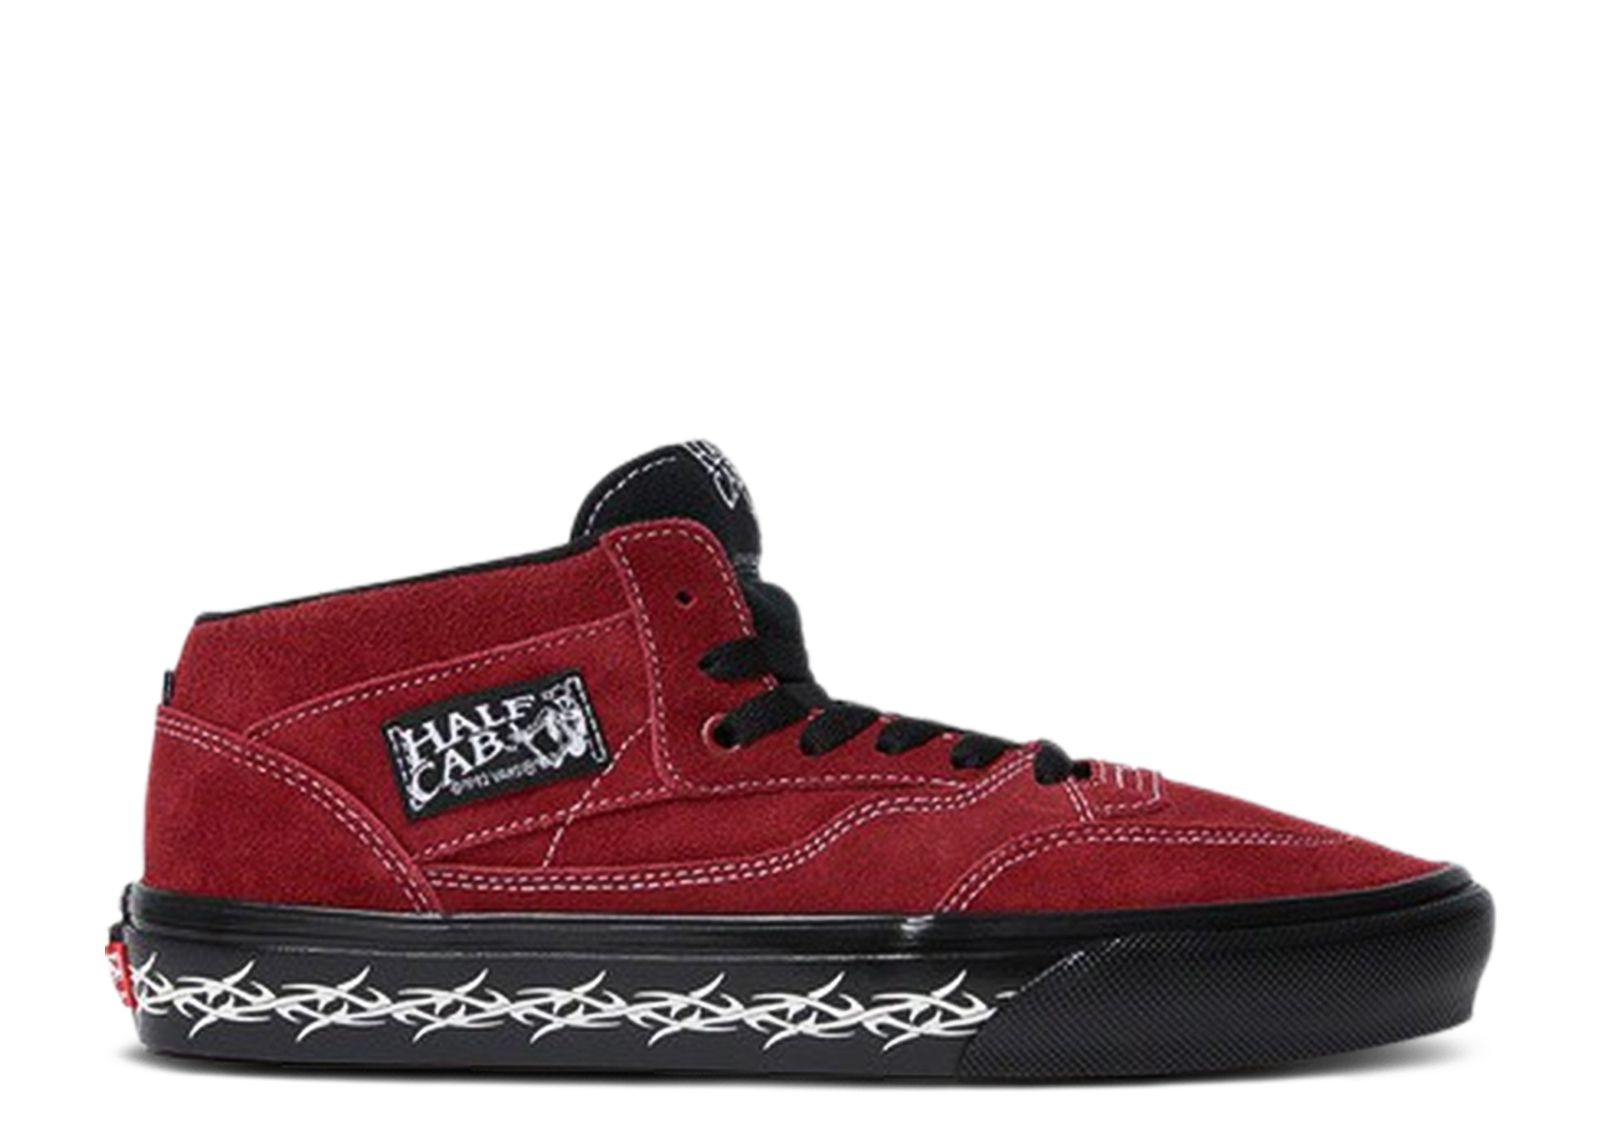 Кроссовки Vans Supreme X Half Cab 'Barbed Wire - Burgundy', красный ce cog 4d barbed suture with l cannula 21g 100mm wire fact lift hilos tensores hskinlift pdo molding fishbone mono thread